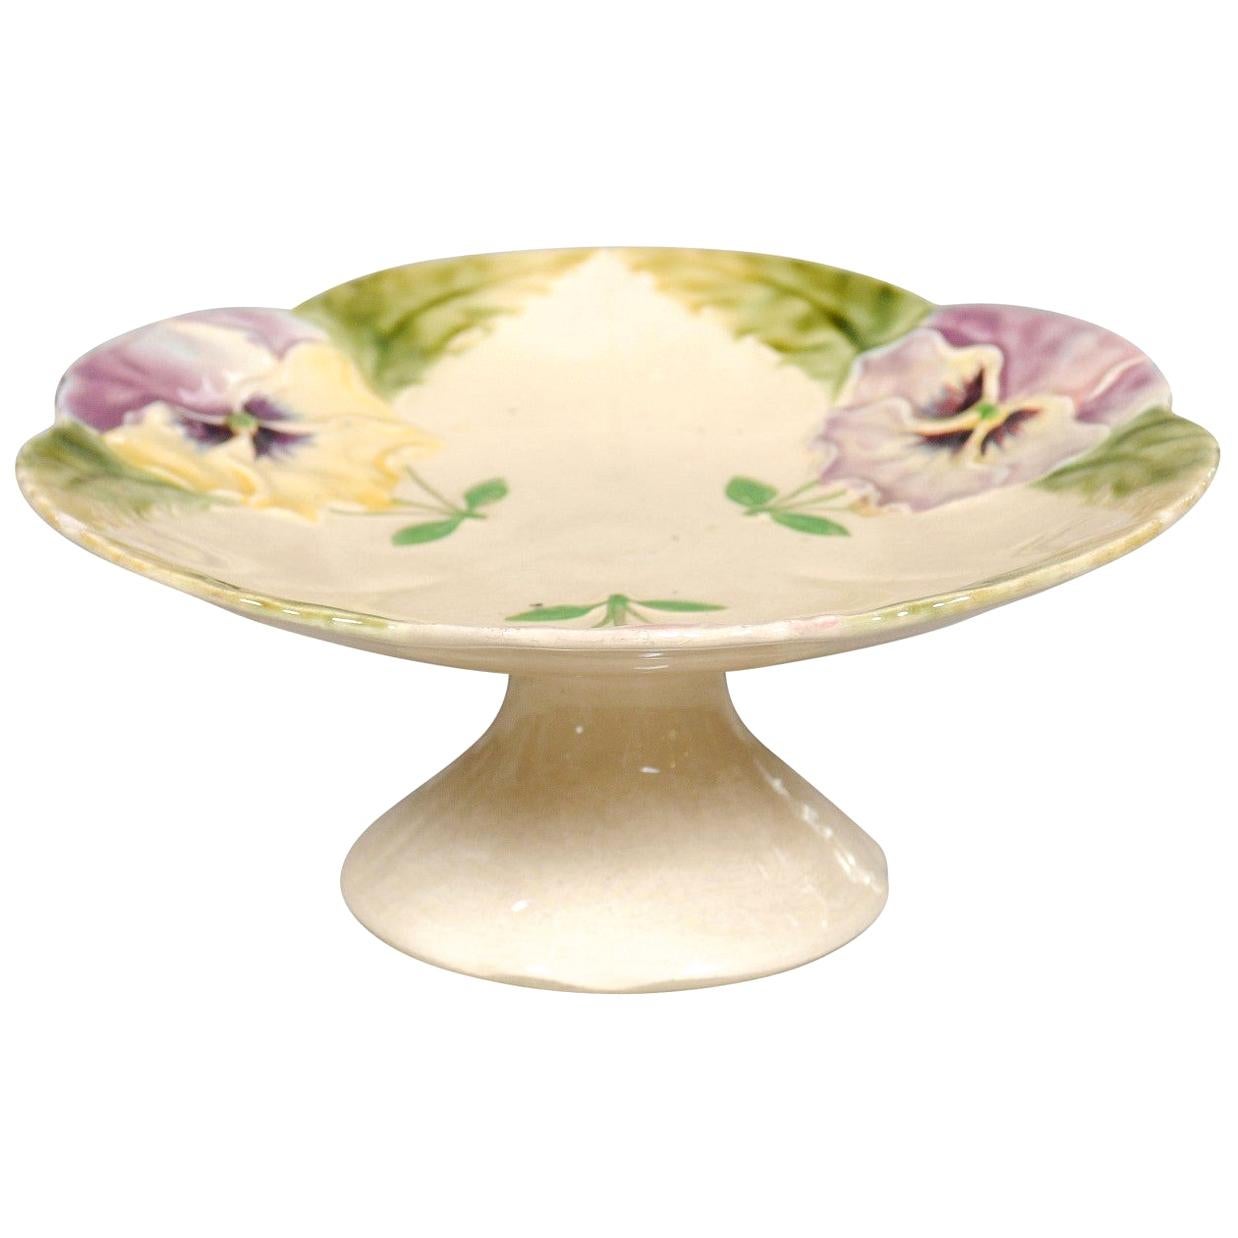 French Majolica Compote with Pansies and Scalloped Edge from the 19th Century For Sale